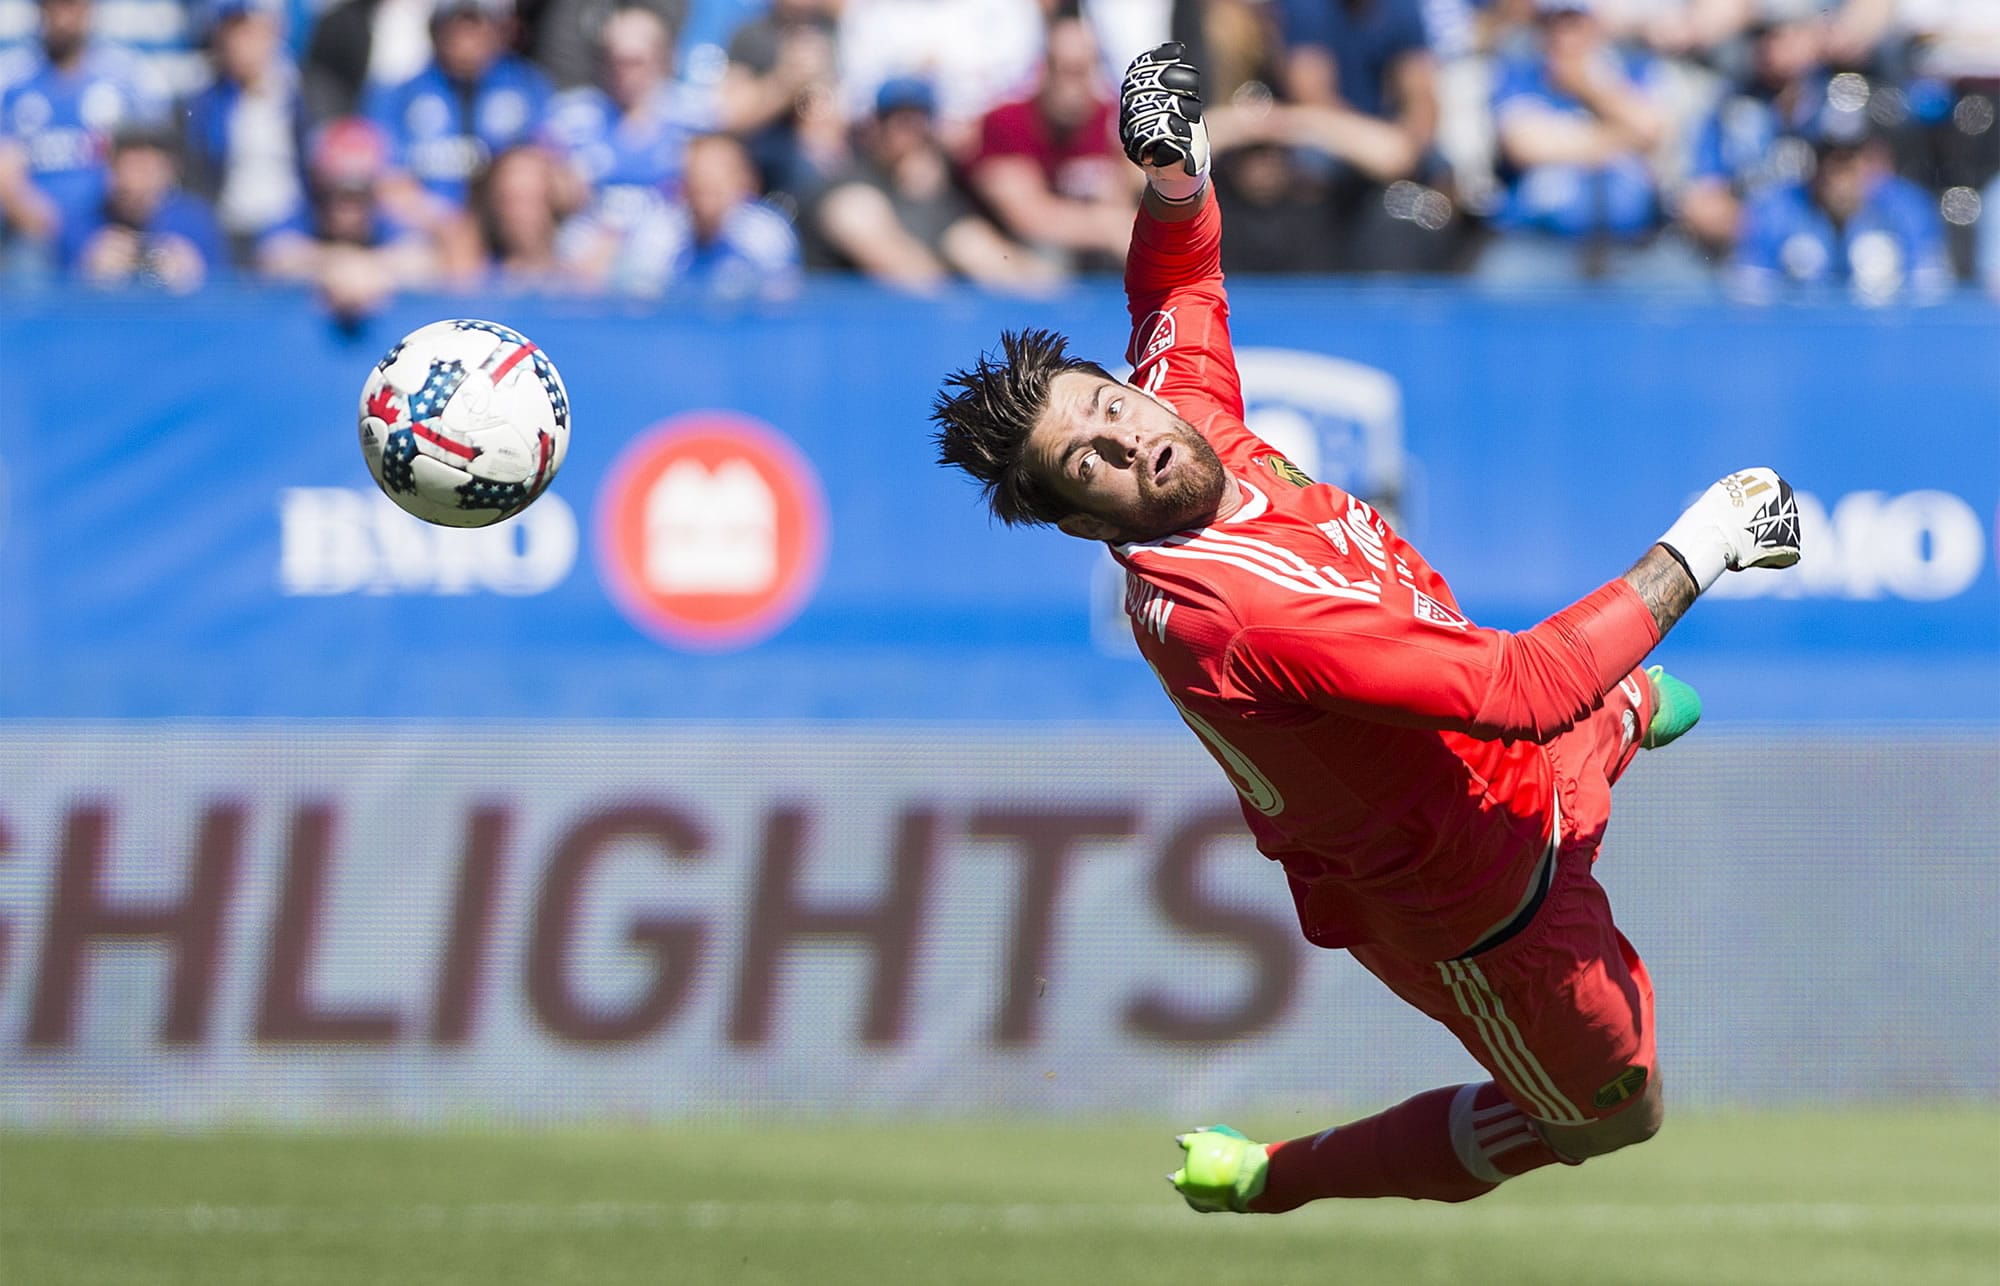 Portland Timbers' goalkeeper Jake Gleeson can't stop a goal by Montreal Impact's Kyle Fisher during the first half of an MLS soccer game in Montreal, Saturday, May 20, 2017.